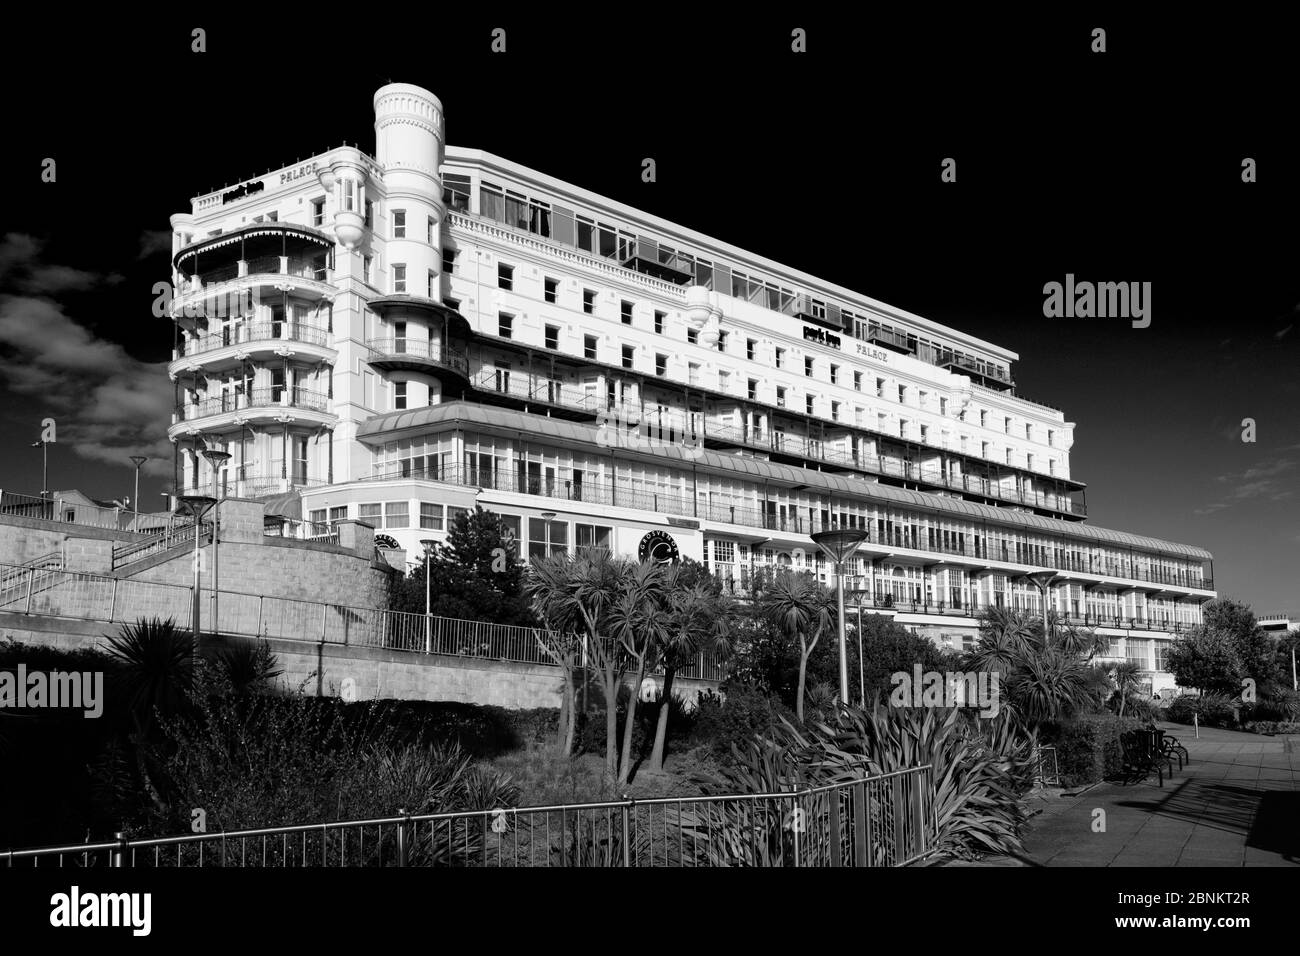 The Palace Hotel, Royal Terrace, Southend-on-Sea town, Thames Estuary, Essex, County, England, UK Stock Photo